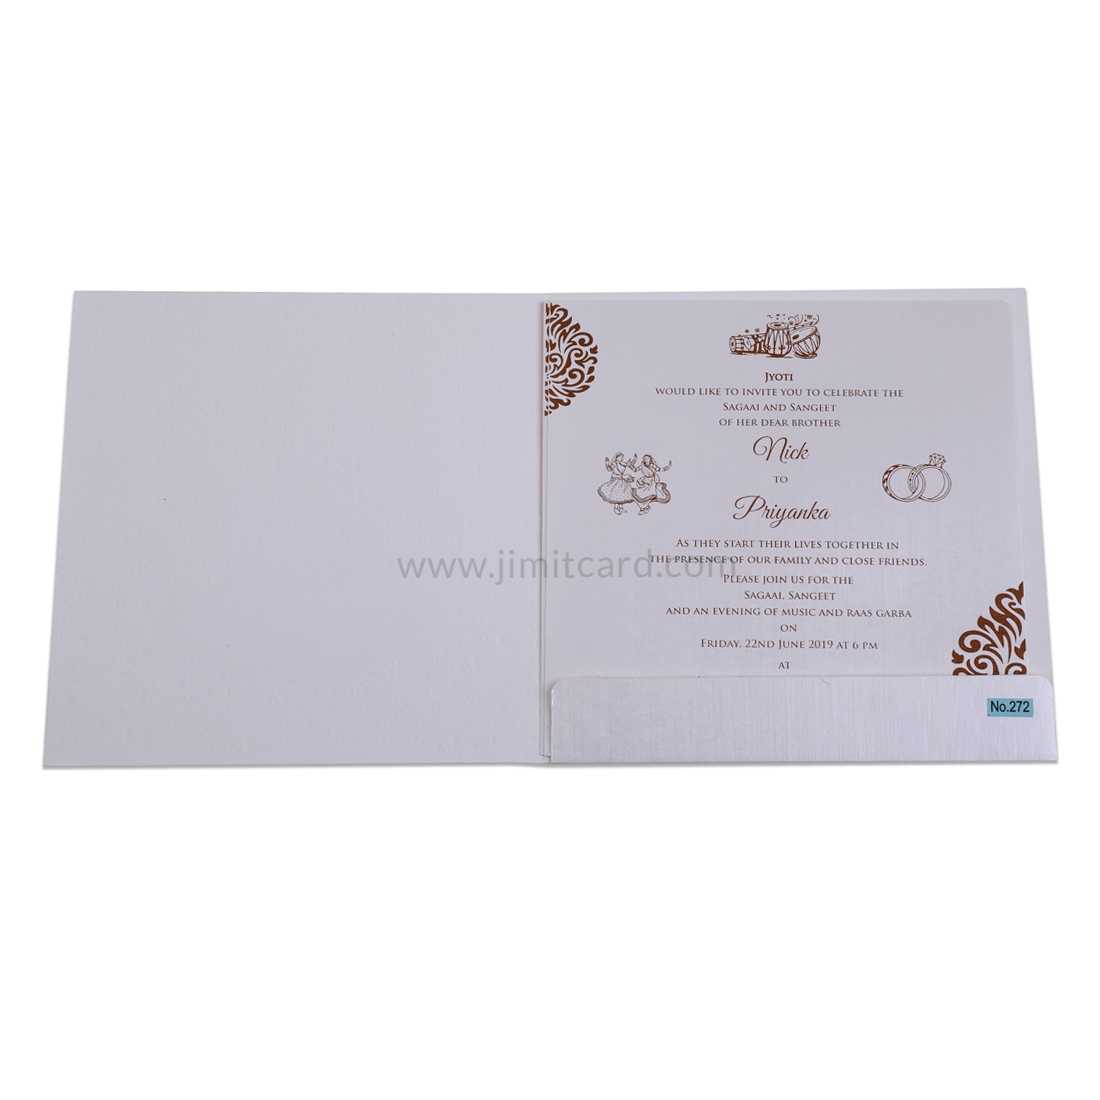 White and Golden Wedding Invitation card with Flower Embedded design -12821